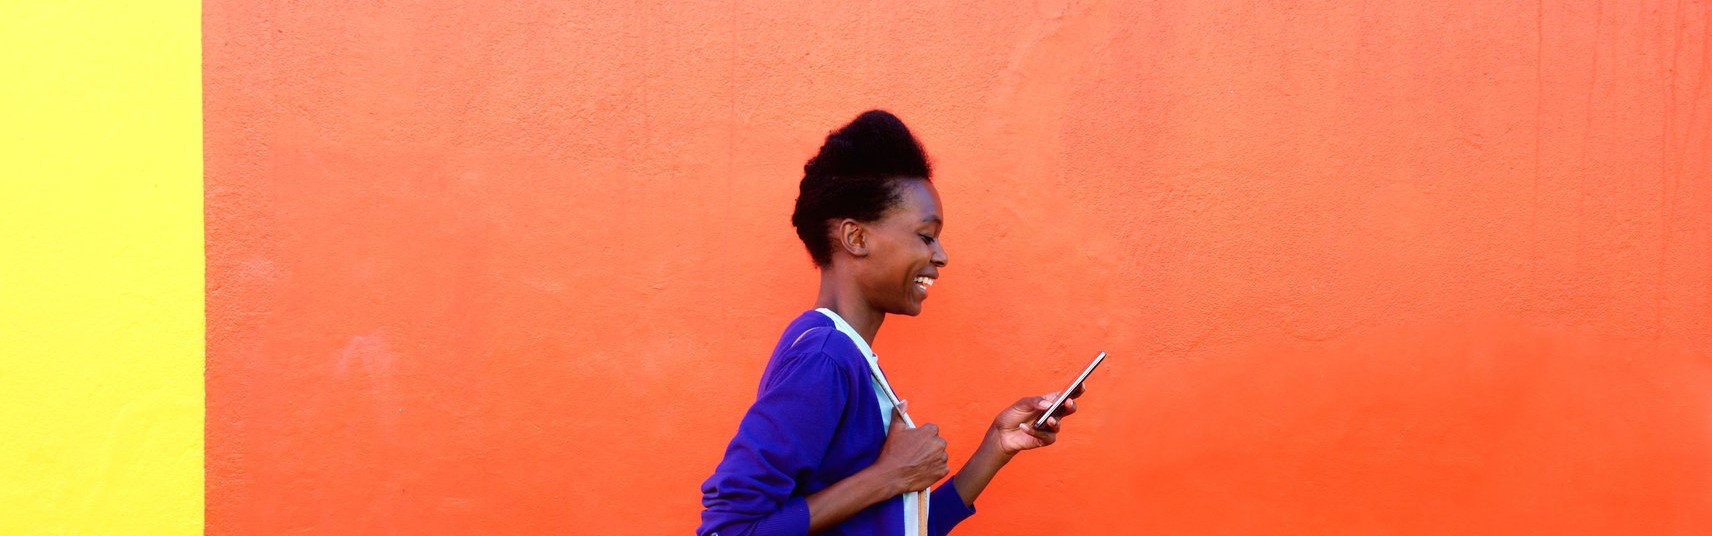 African woman using her cellphone